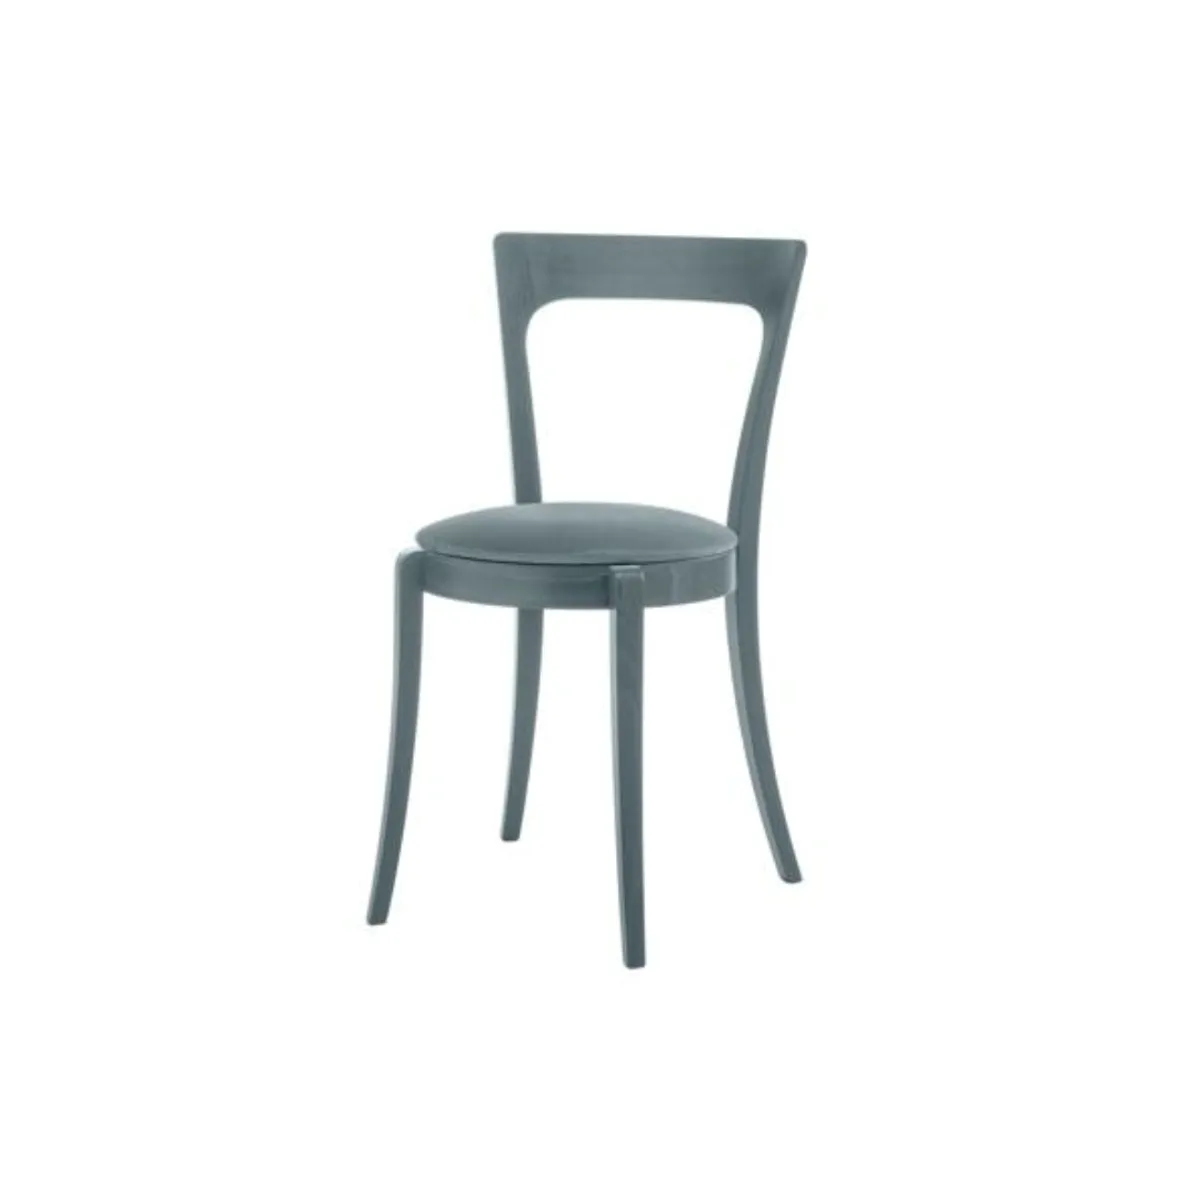 Elodie soft side chair 1